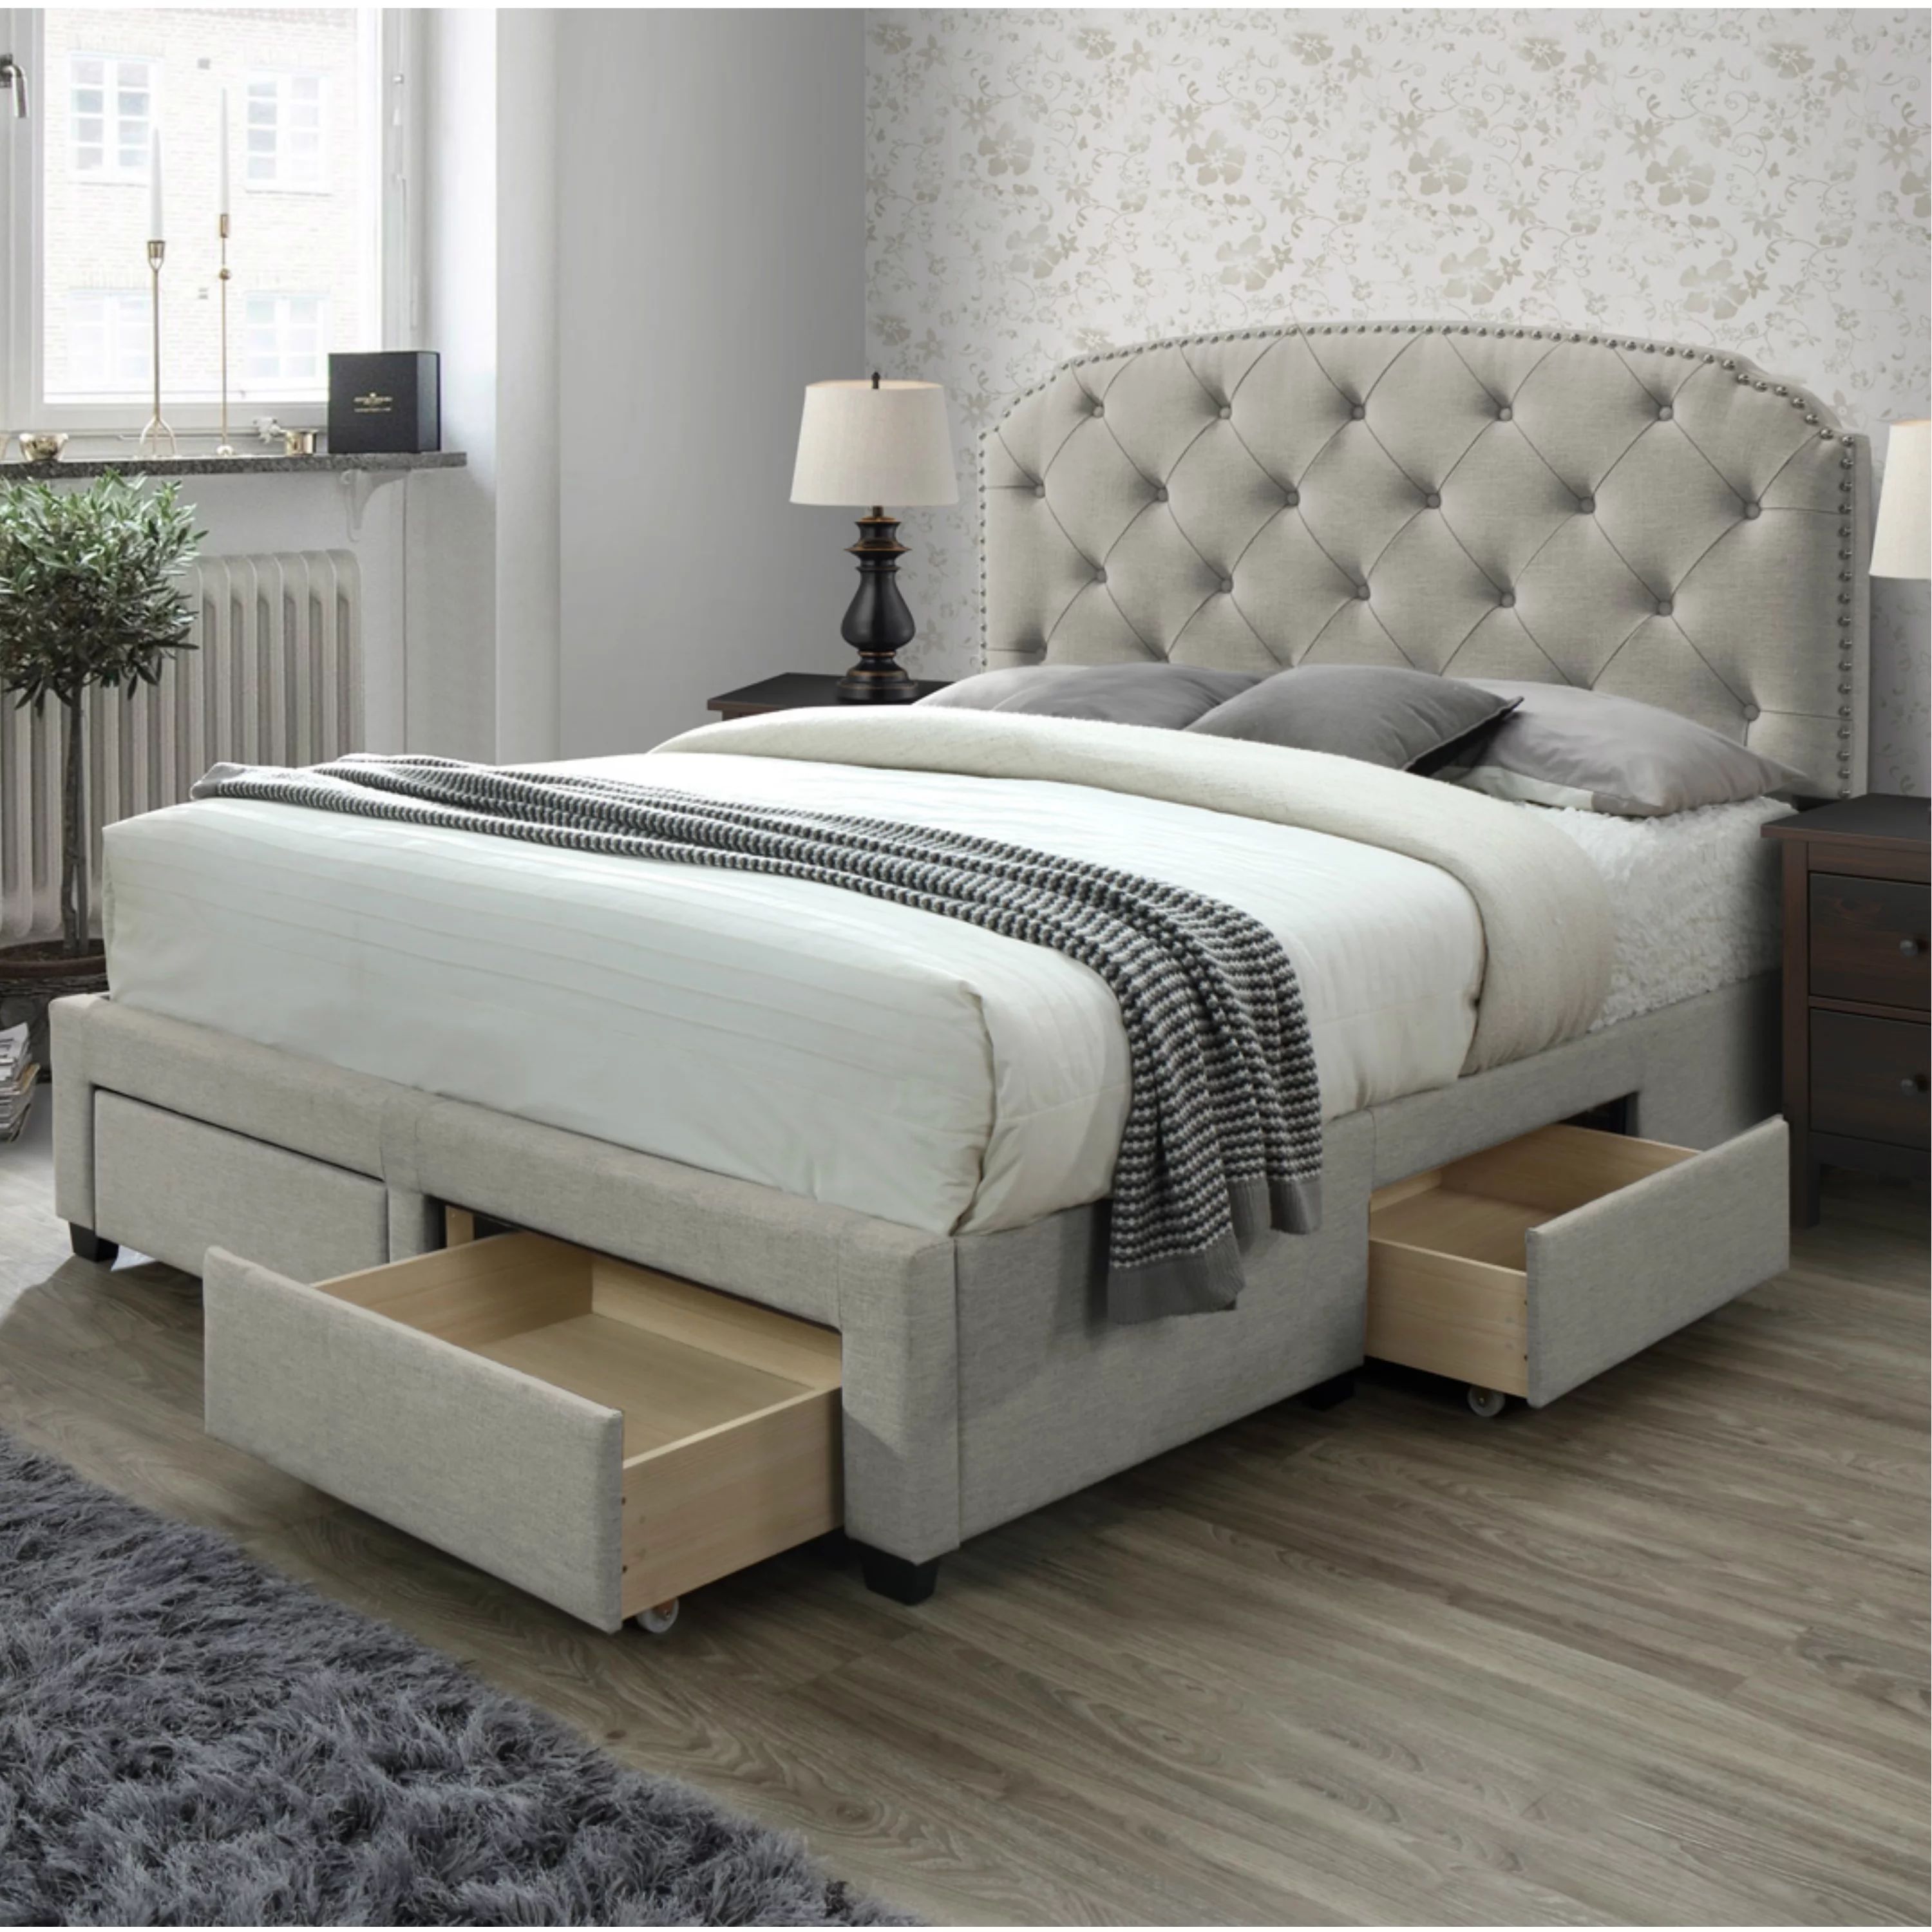 DG Casa Argo Tufted Upholstered Panel Bed Frame with Storage Drawers and Nailhead Trim Headboard,... | Walmart (US)